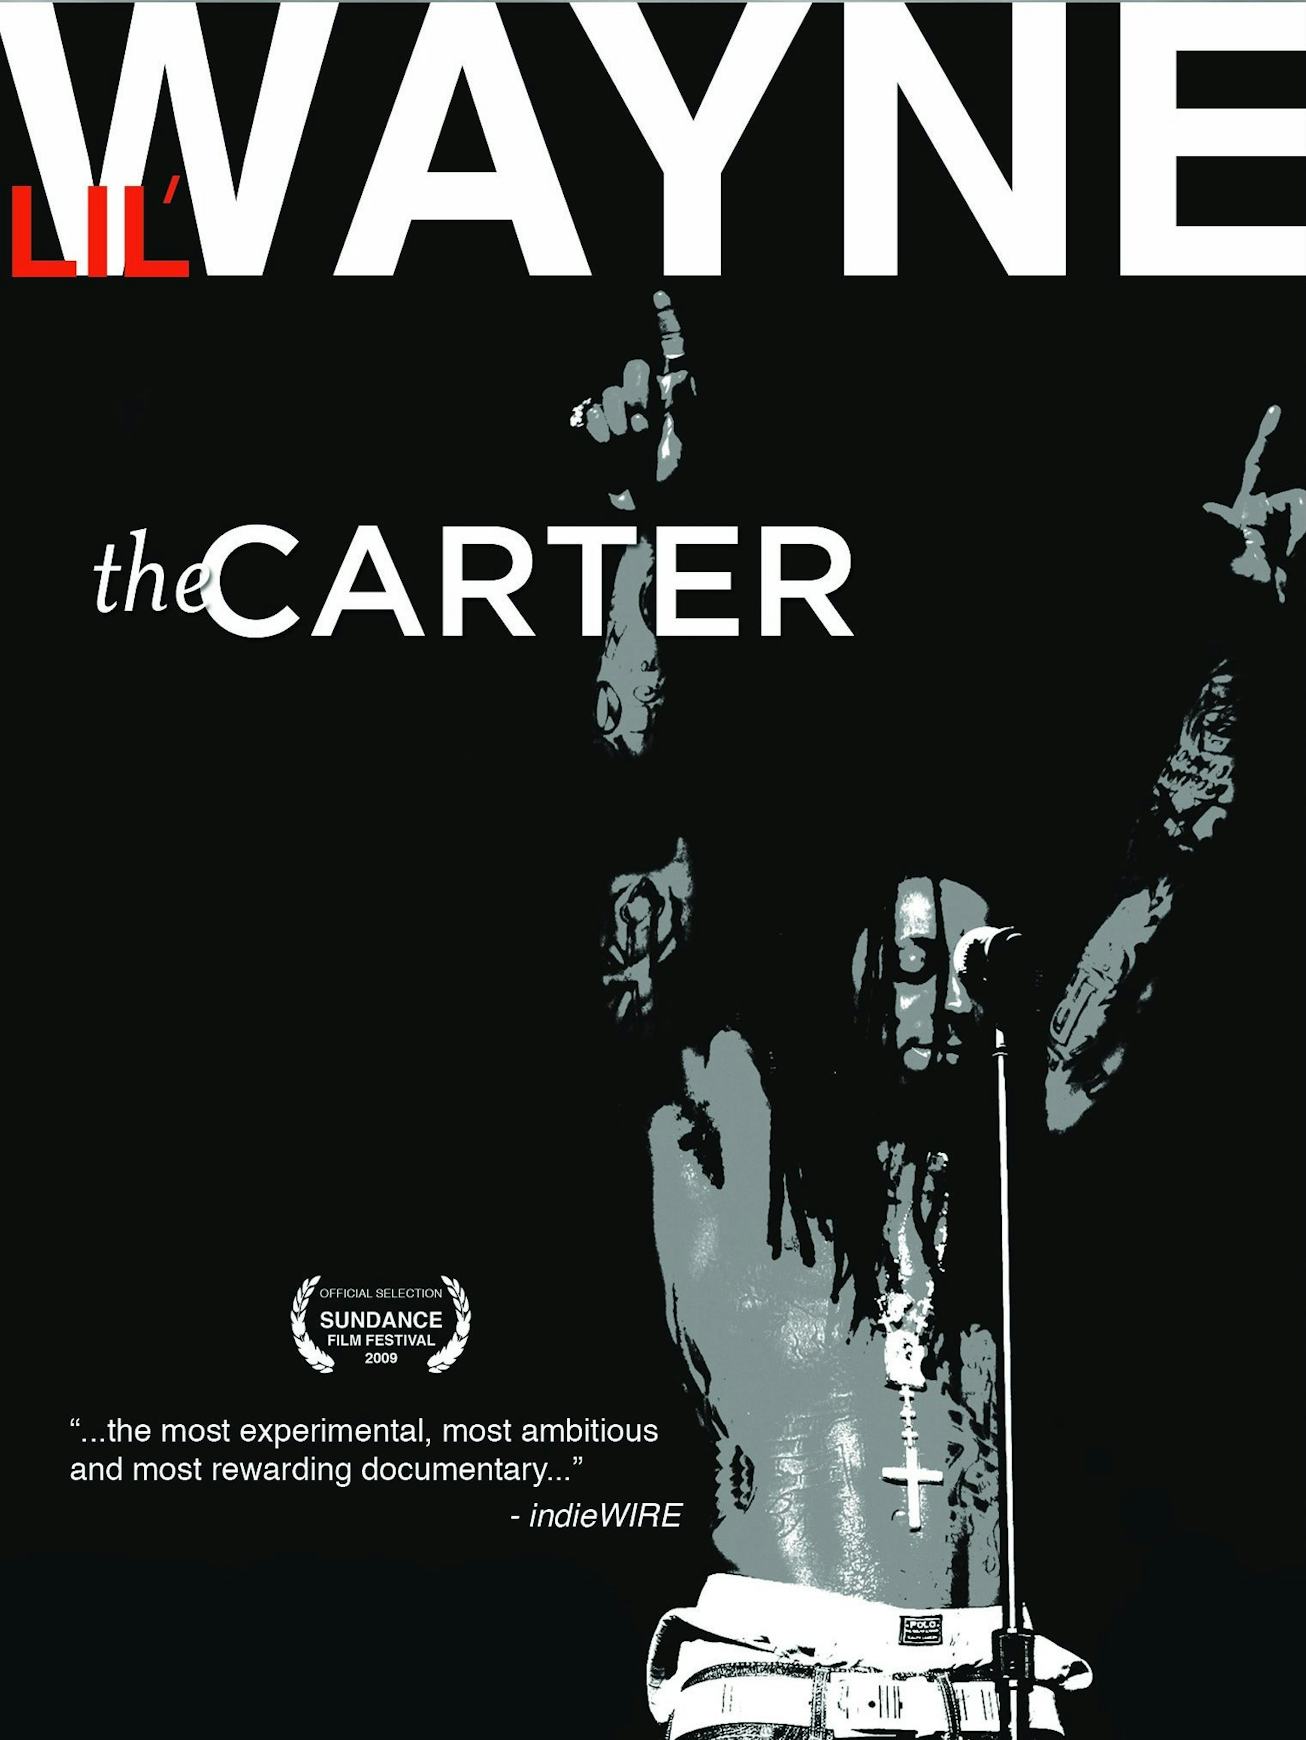 'The Carter' is one of the most revealing music documentaries of all time